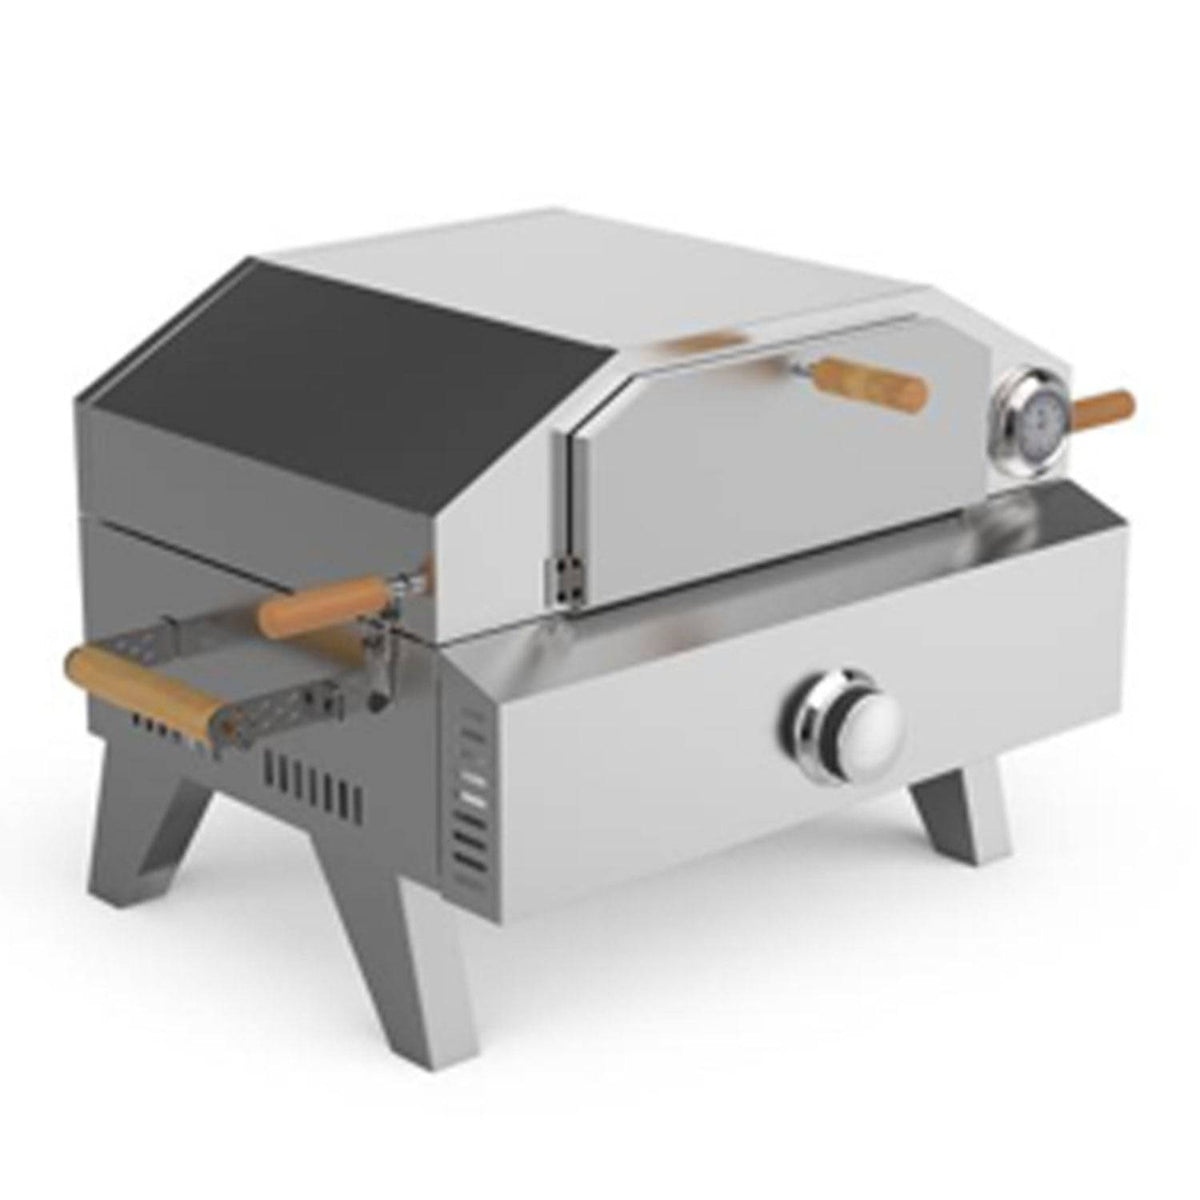 Fobest Outdoor Portable Stainless Steel Gas Pizza Oven & Grill - Pizza Oven-Fobest Appliance